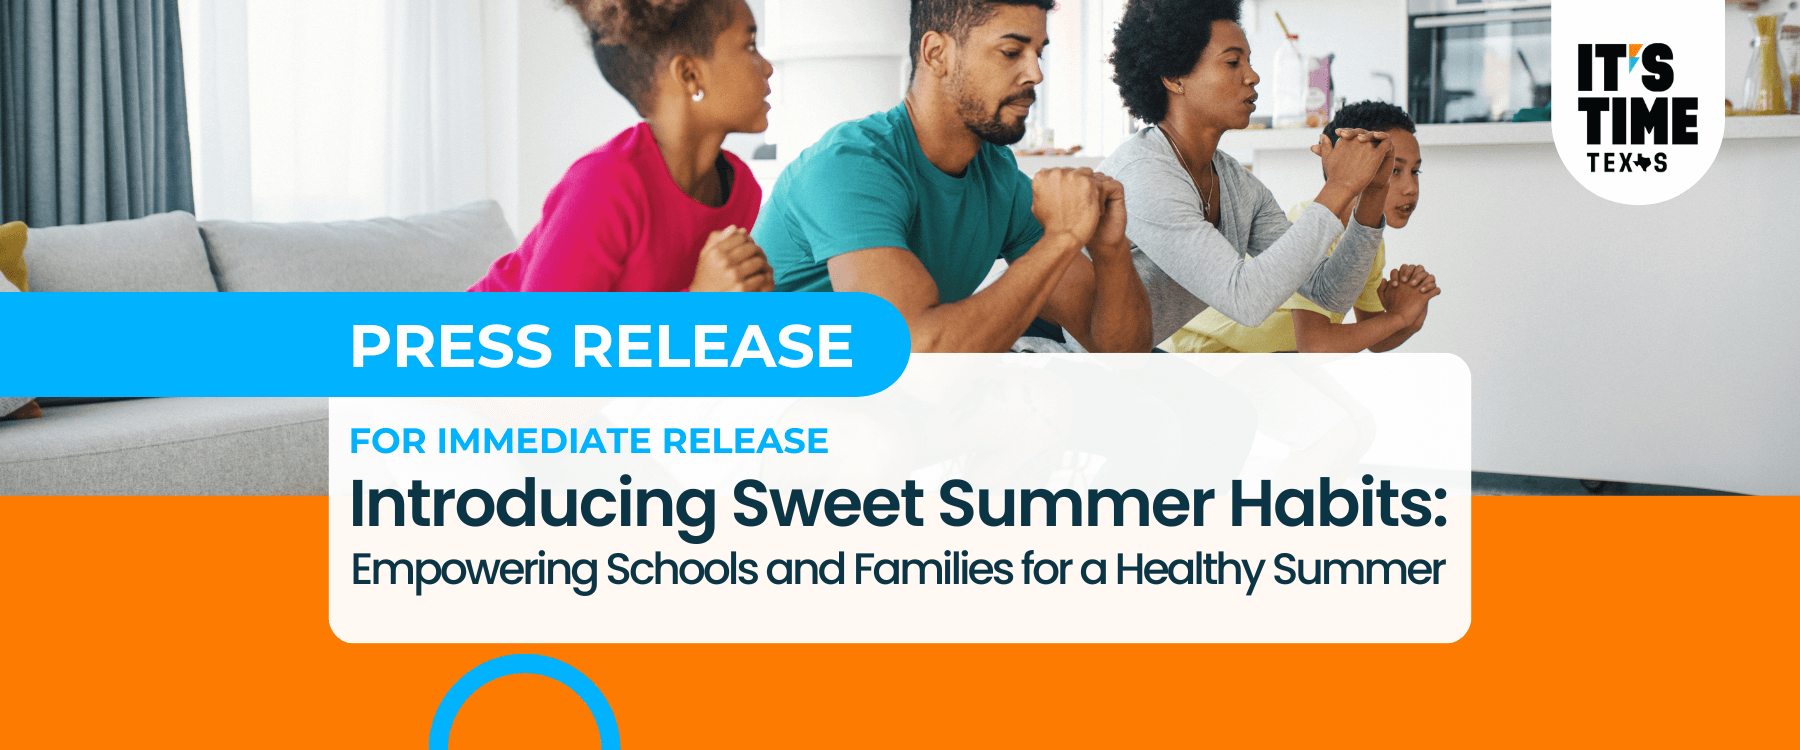 Featured image for “Introducing Sweet Summer Habits: Empowering Schools and Families for a Healthy Summer”